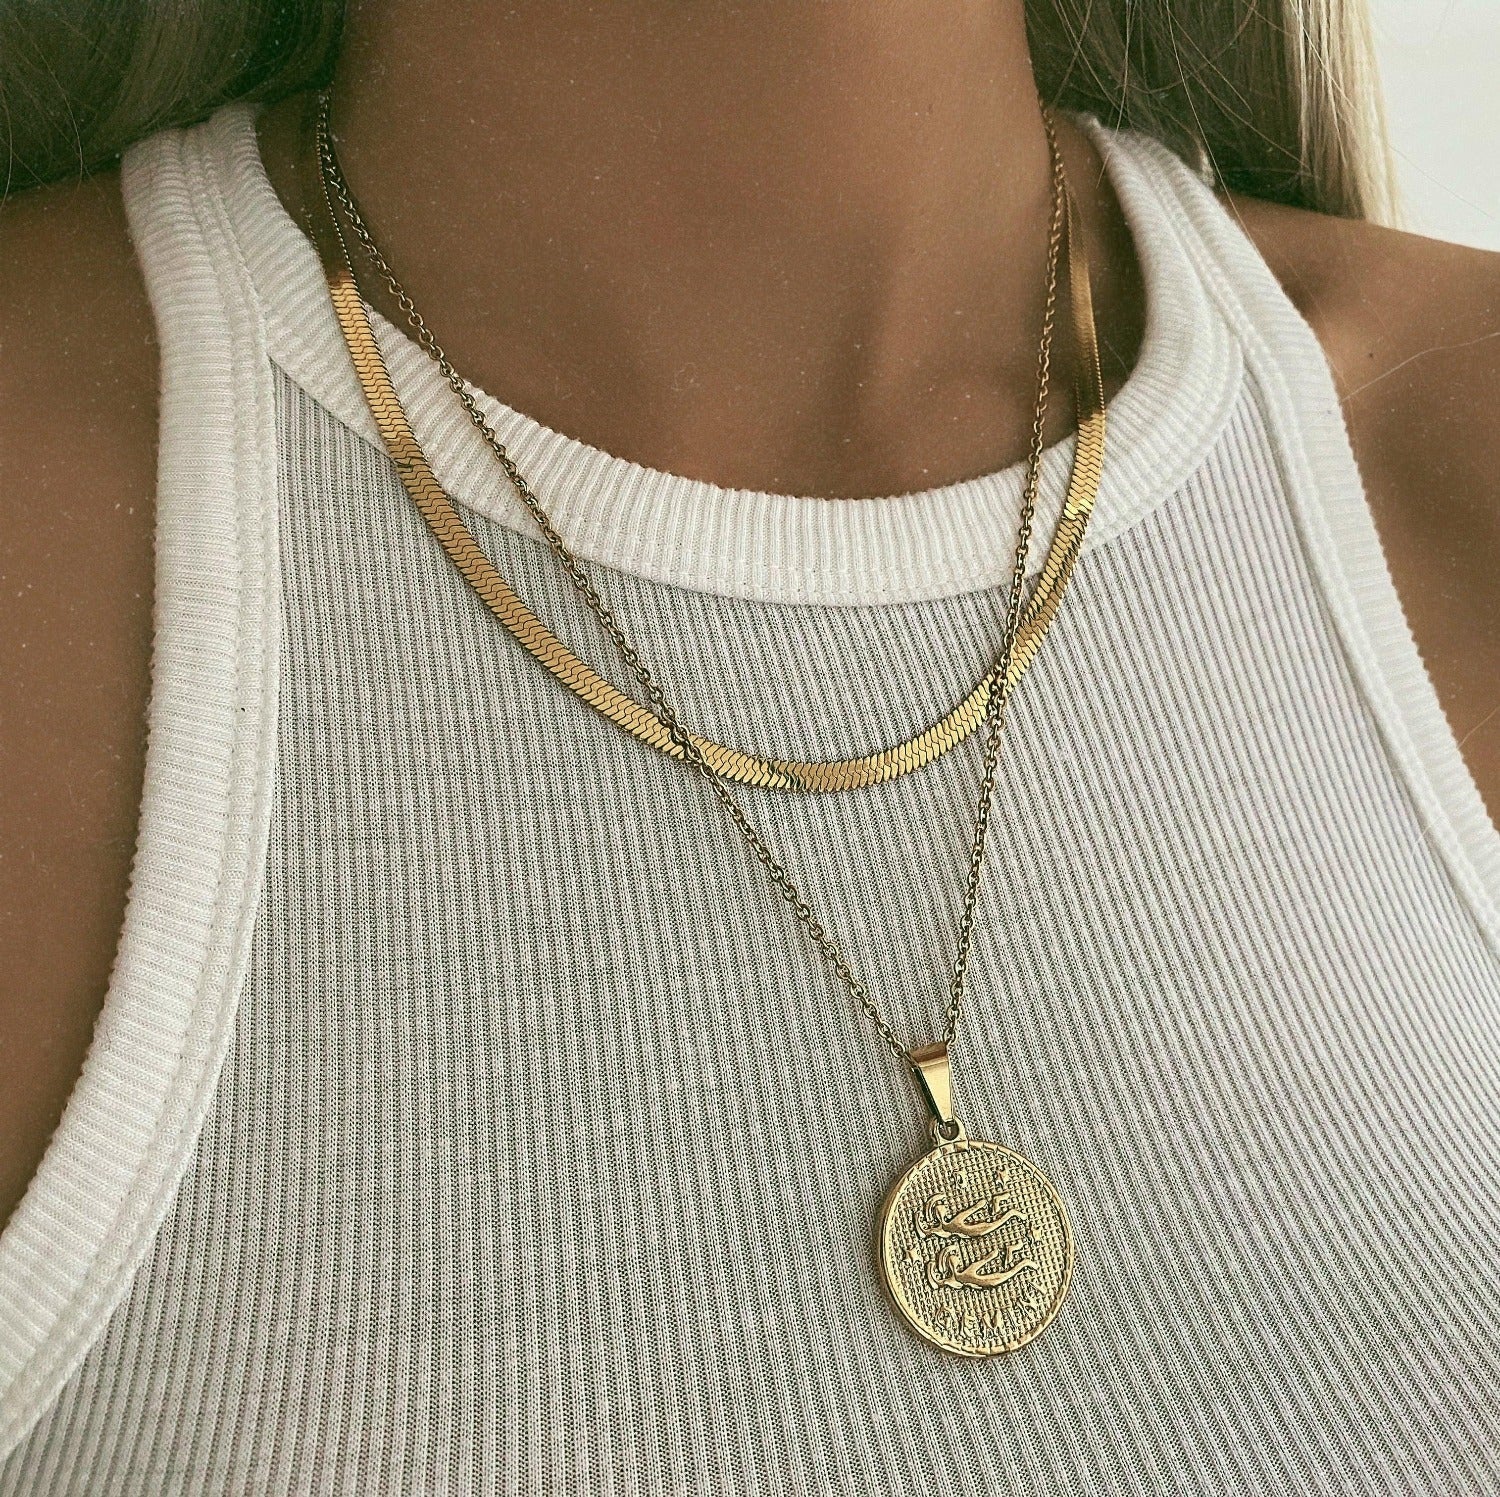 BohoMoon Stainless Steel Coin Zodiac Necklace